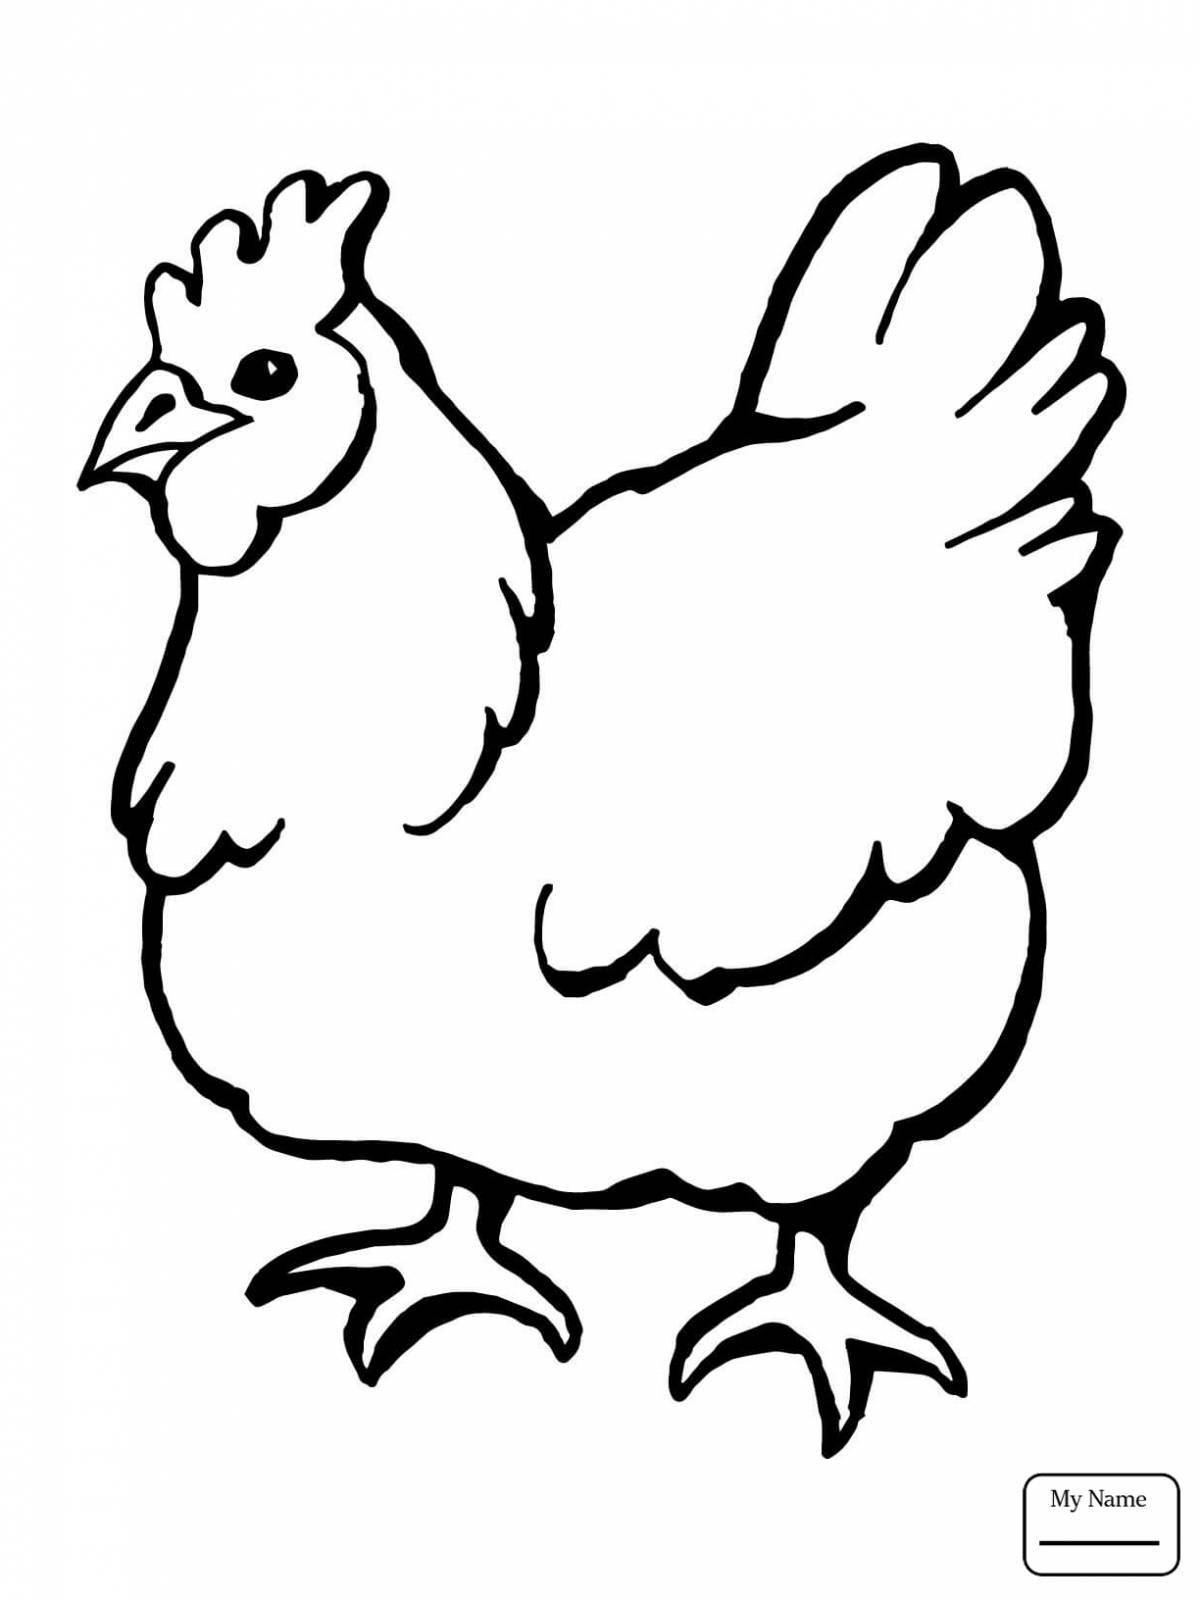 Colorful chicken coloring page for 2-3 year olds